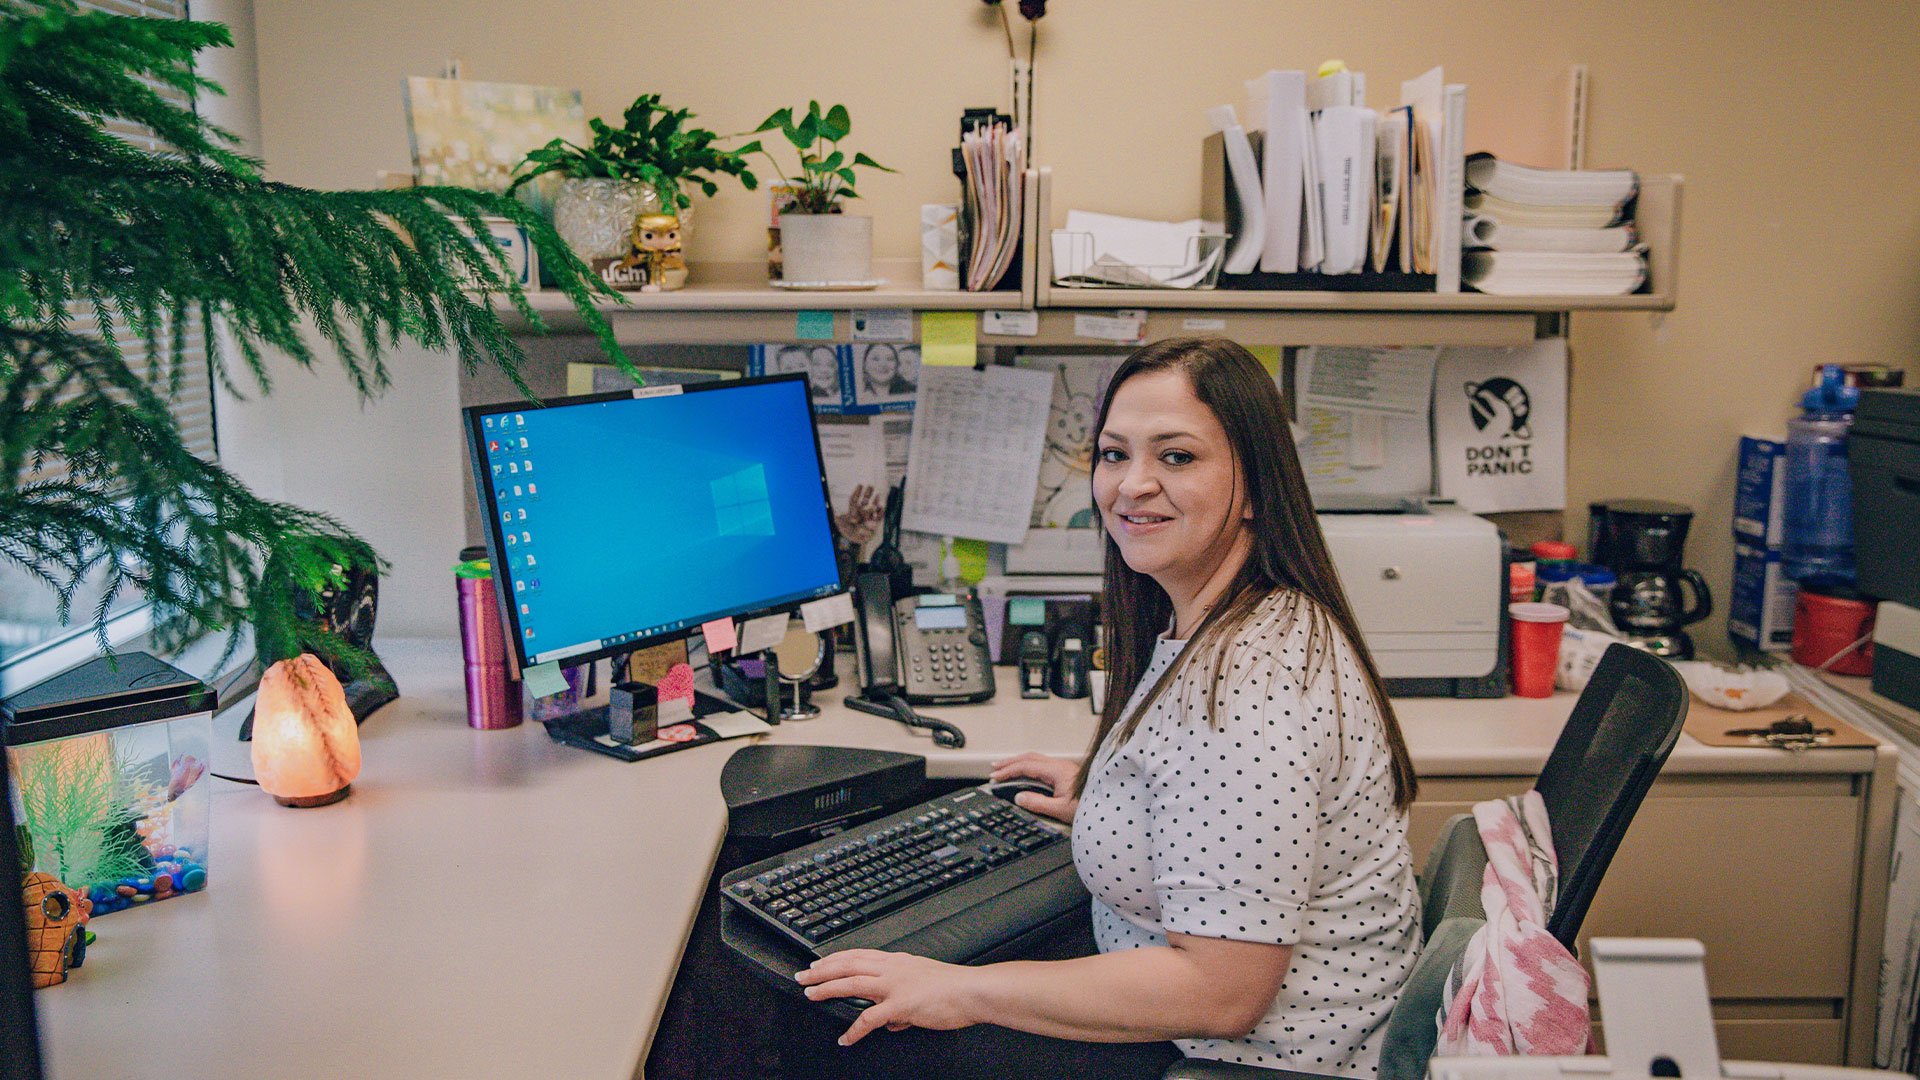 Residents in UGM programs are urged to connect their career path with their passions, something our Business Partners have made possible time and again. Meaningful work is a cornerstone of recovery. 